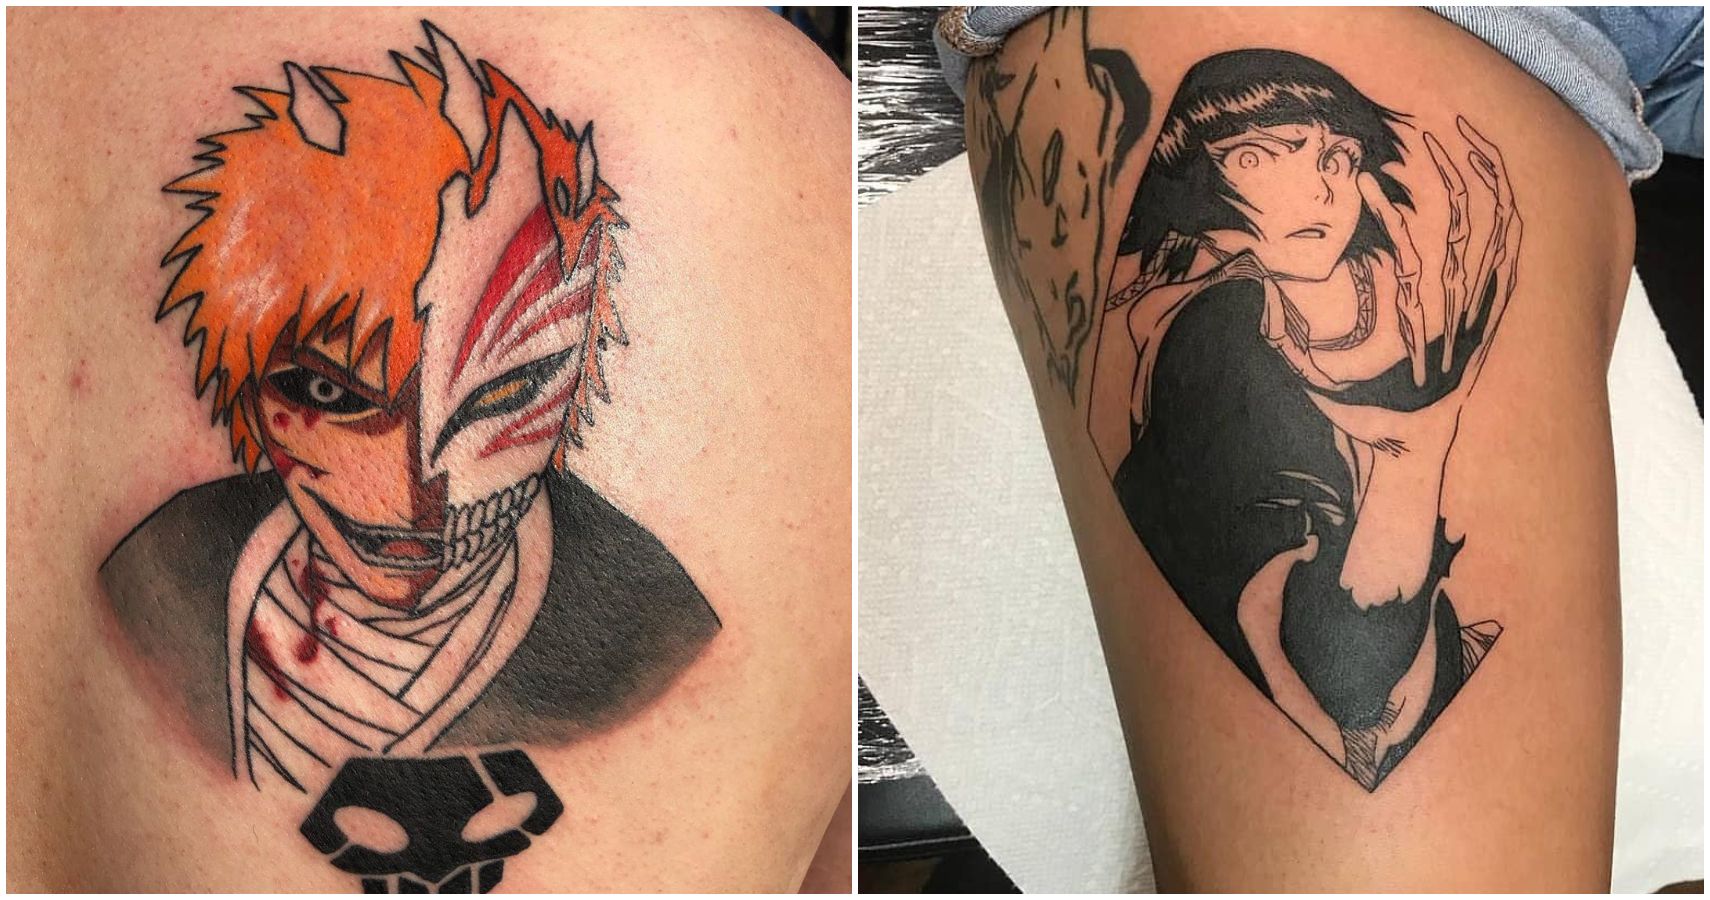 Bleach: 10 Amazing Tattoos To Inspire Your New Ink